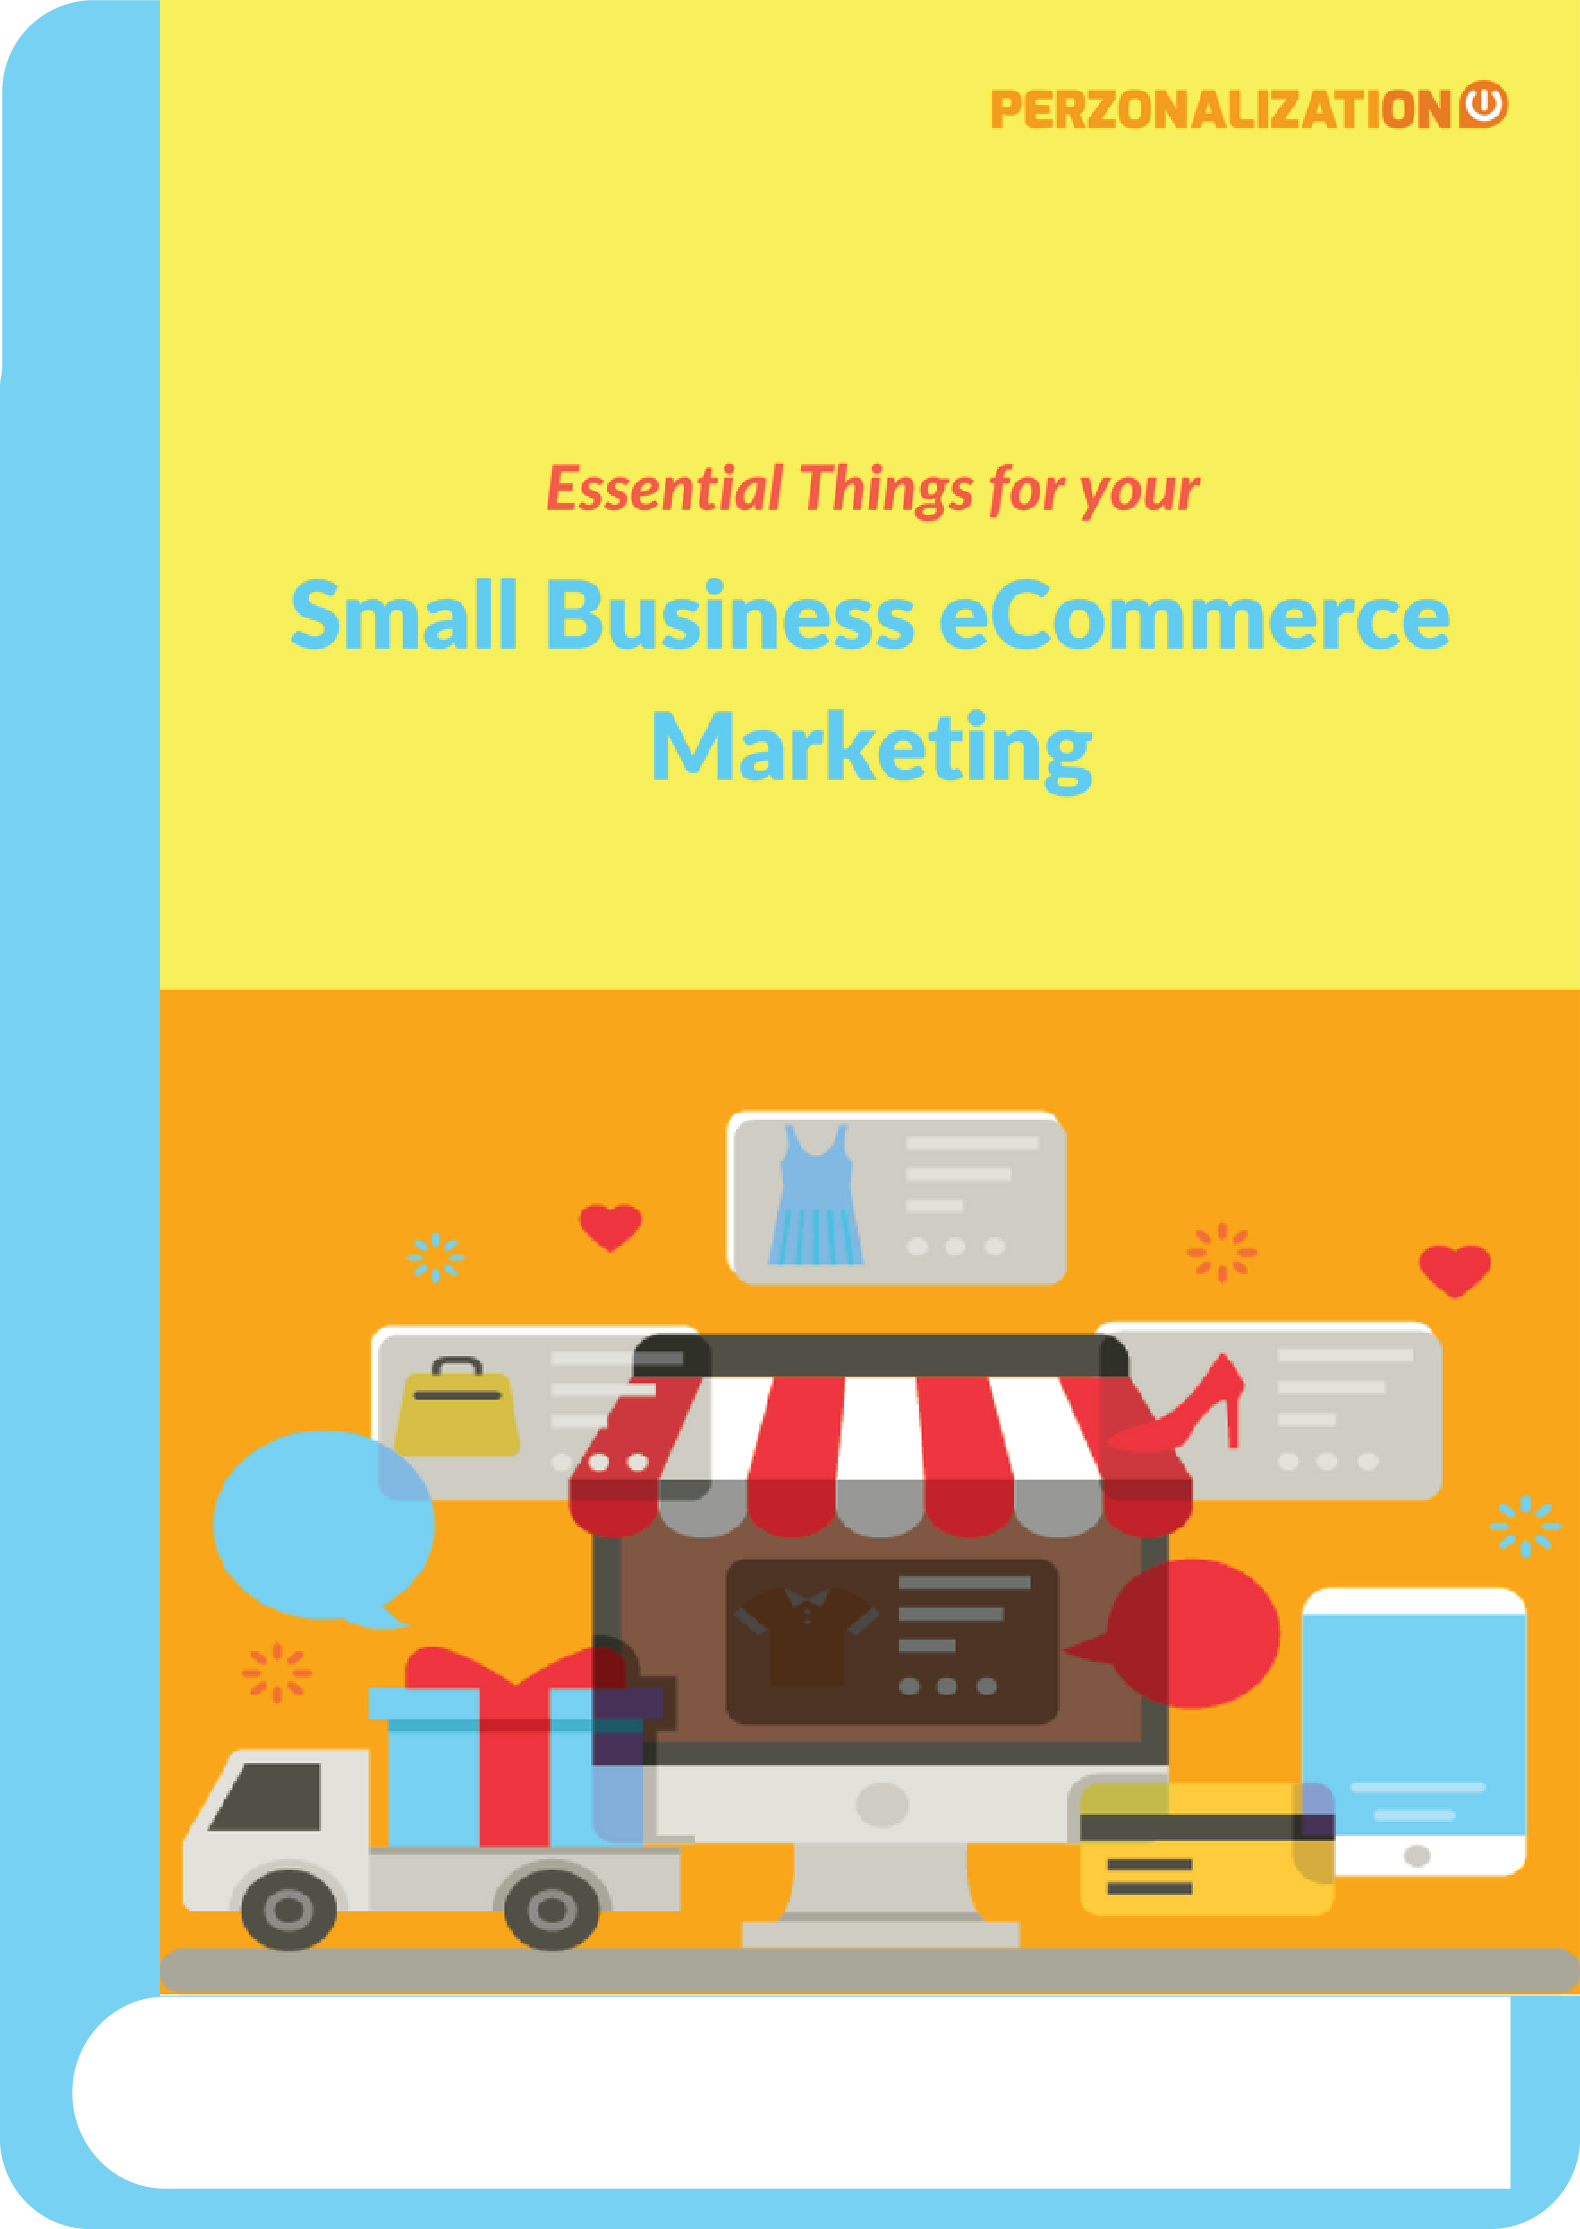 If you're running a small business eCommerce, then SaaS apps may be the answer for the majority of your marketing needs. Find out more in this free eBook!